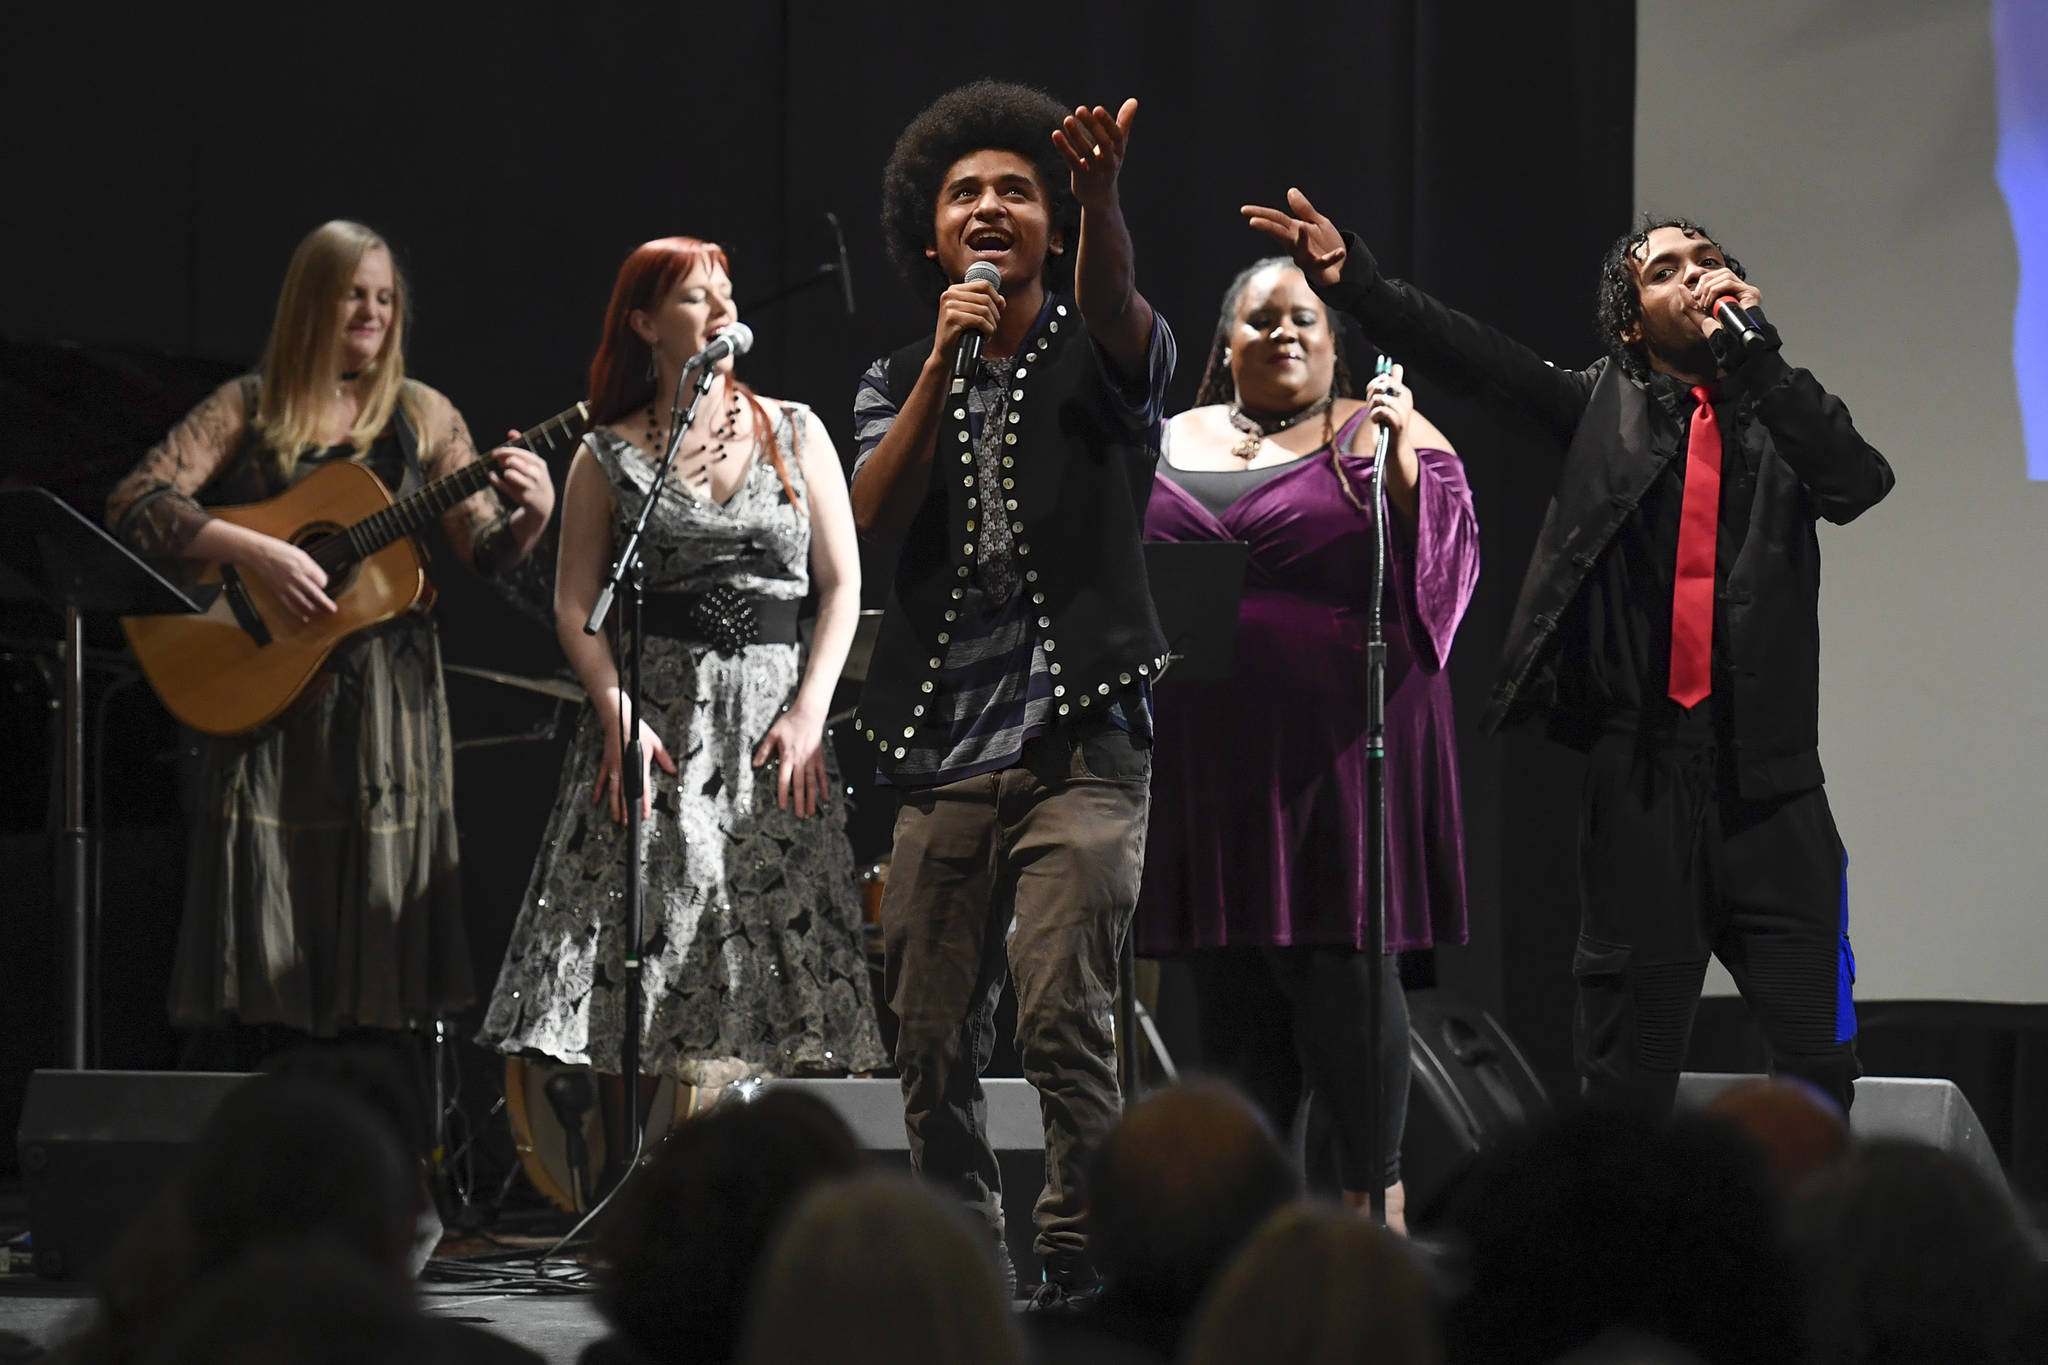 Marian Call, left, Laura Zahasky, Arias “AJ” Hoyle, Jocelyn Miles and Chris Talley perform at the 2019 Governor’s Arts and Humanities Awards at the Juneau Arts & Culture Center on Thursday, Feb. 7, 2019. (Michael Penn | Juneau Empire)